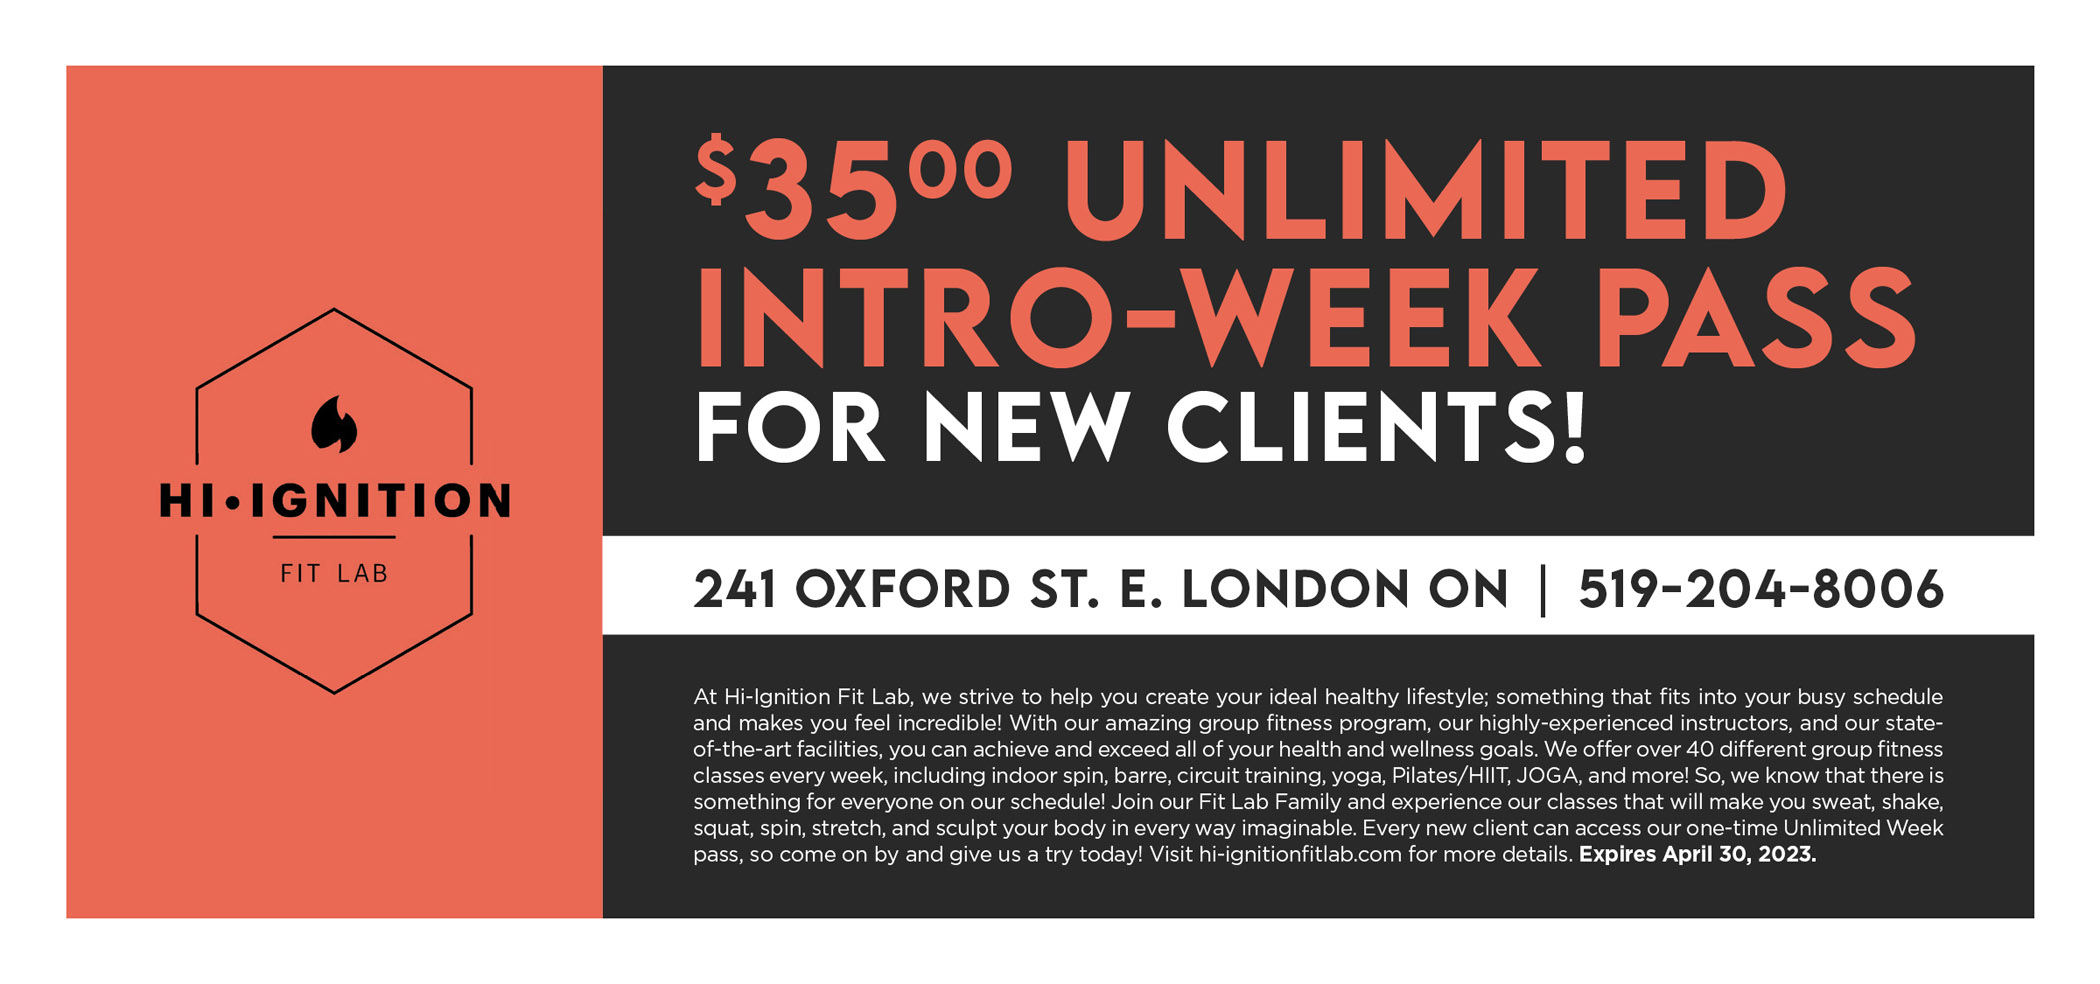 $35 unlimited intro-week pass for new clients